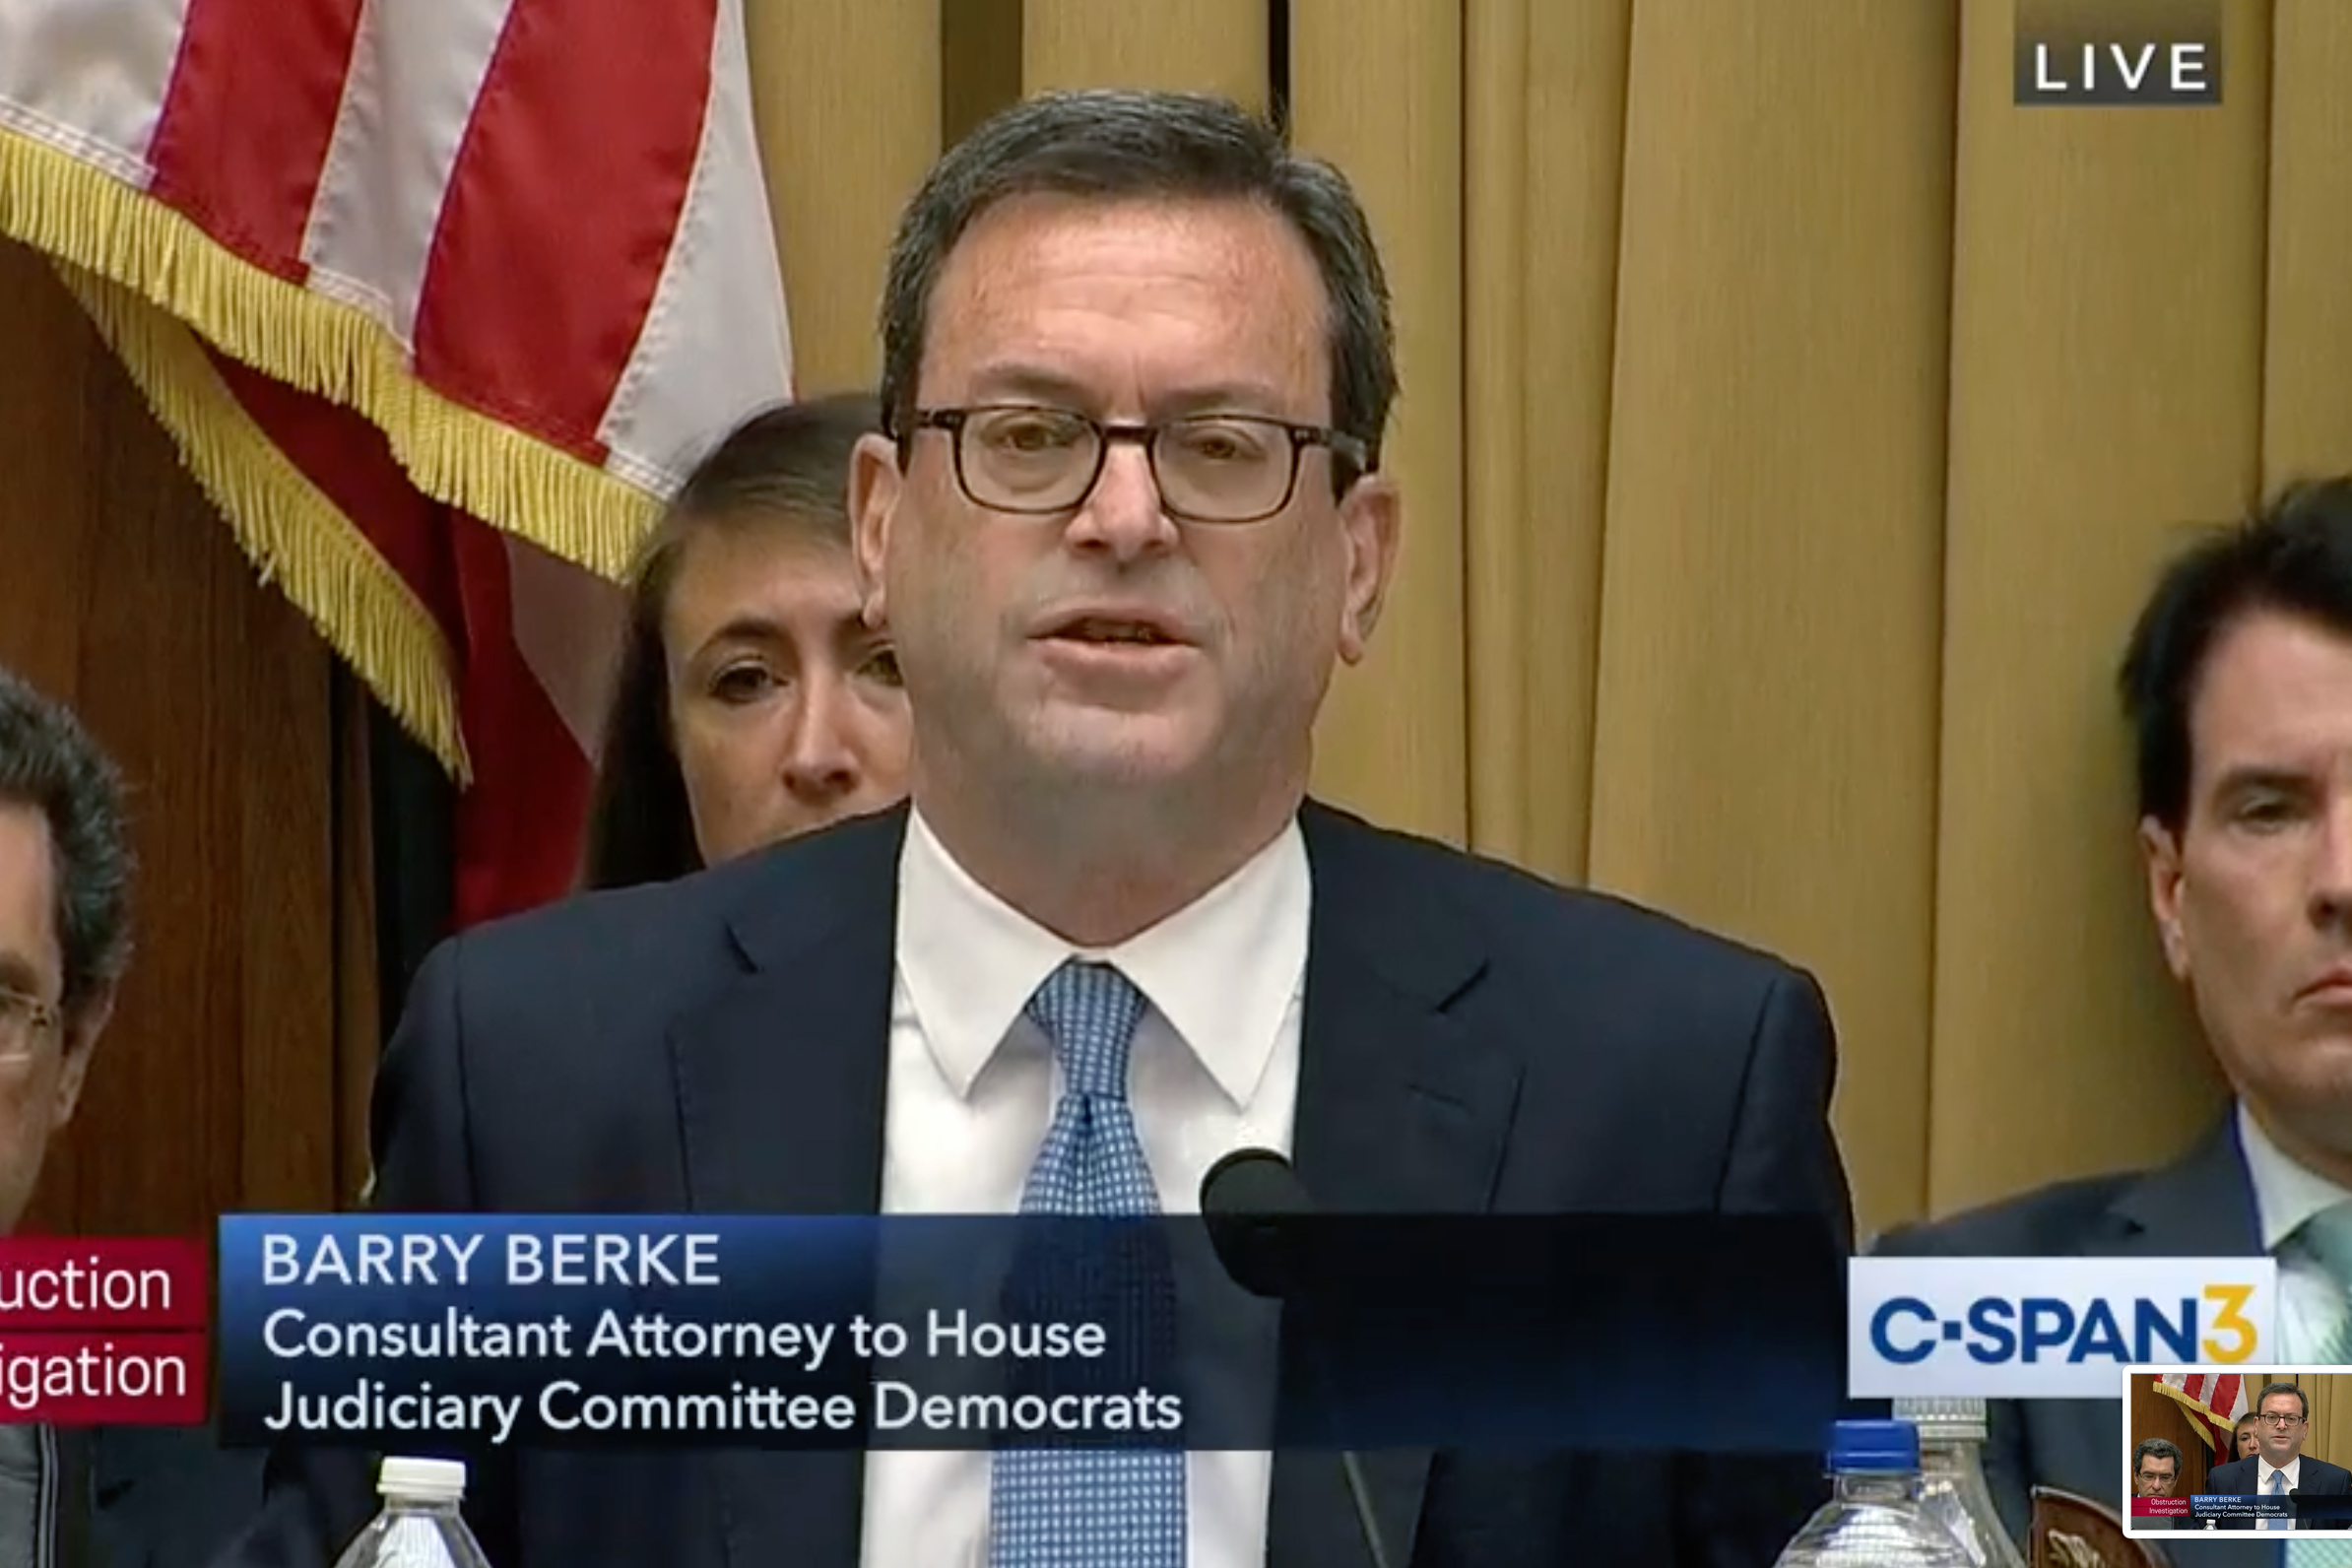 Lawyer Barry Berke questions Corey Lewandowski during a House Judiciary Committee in 2019.